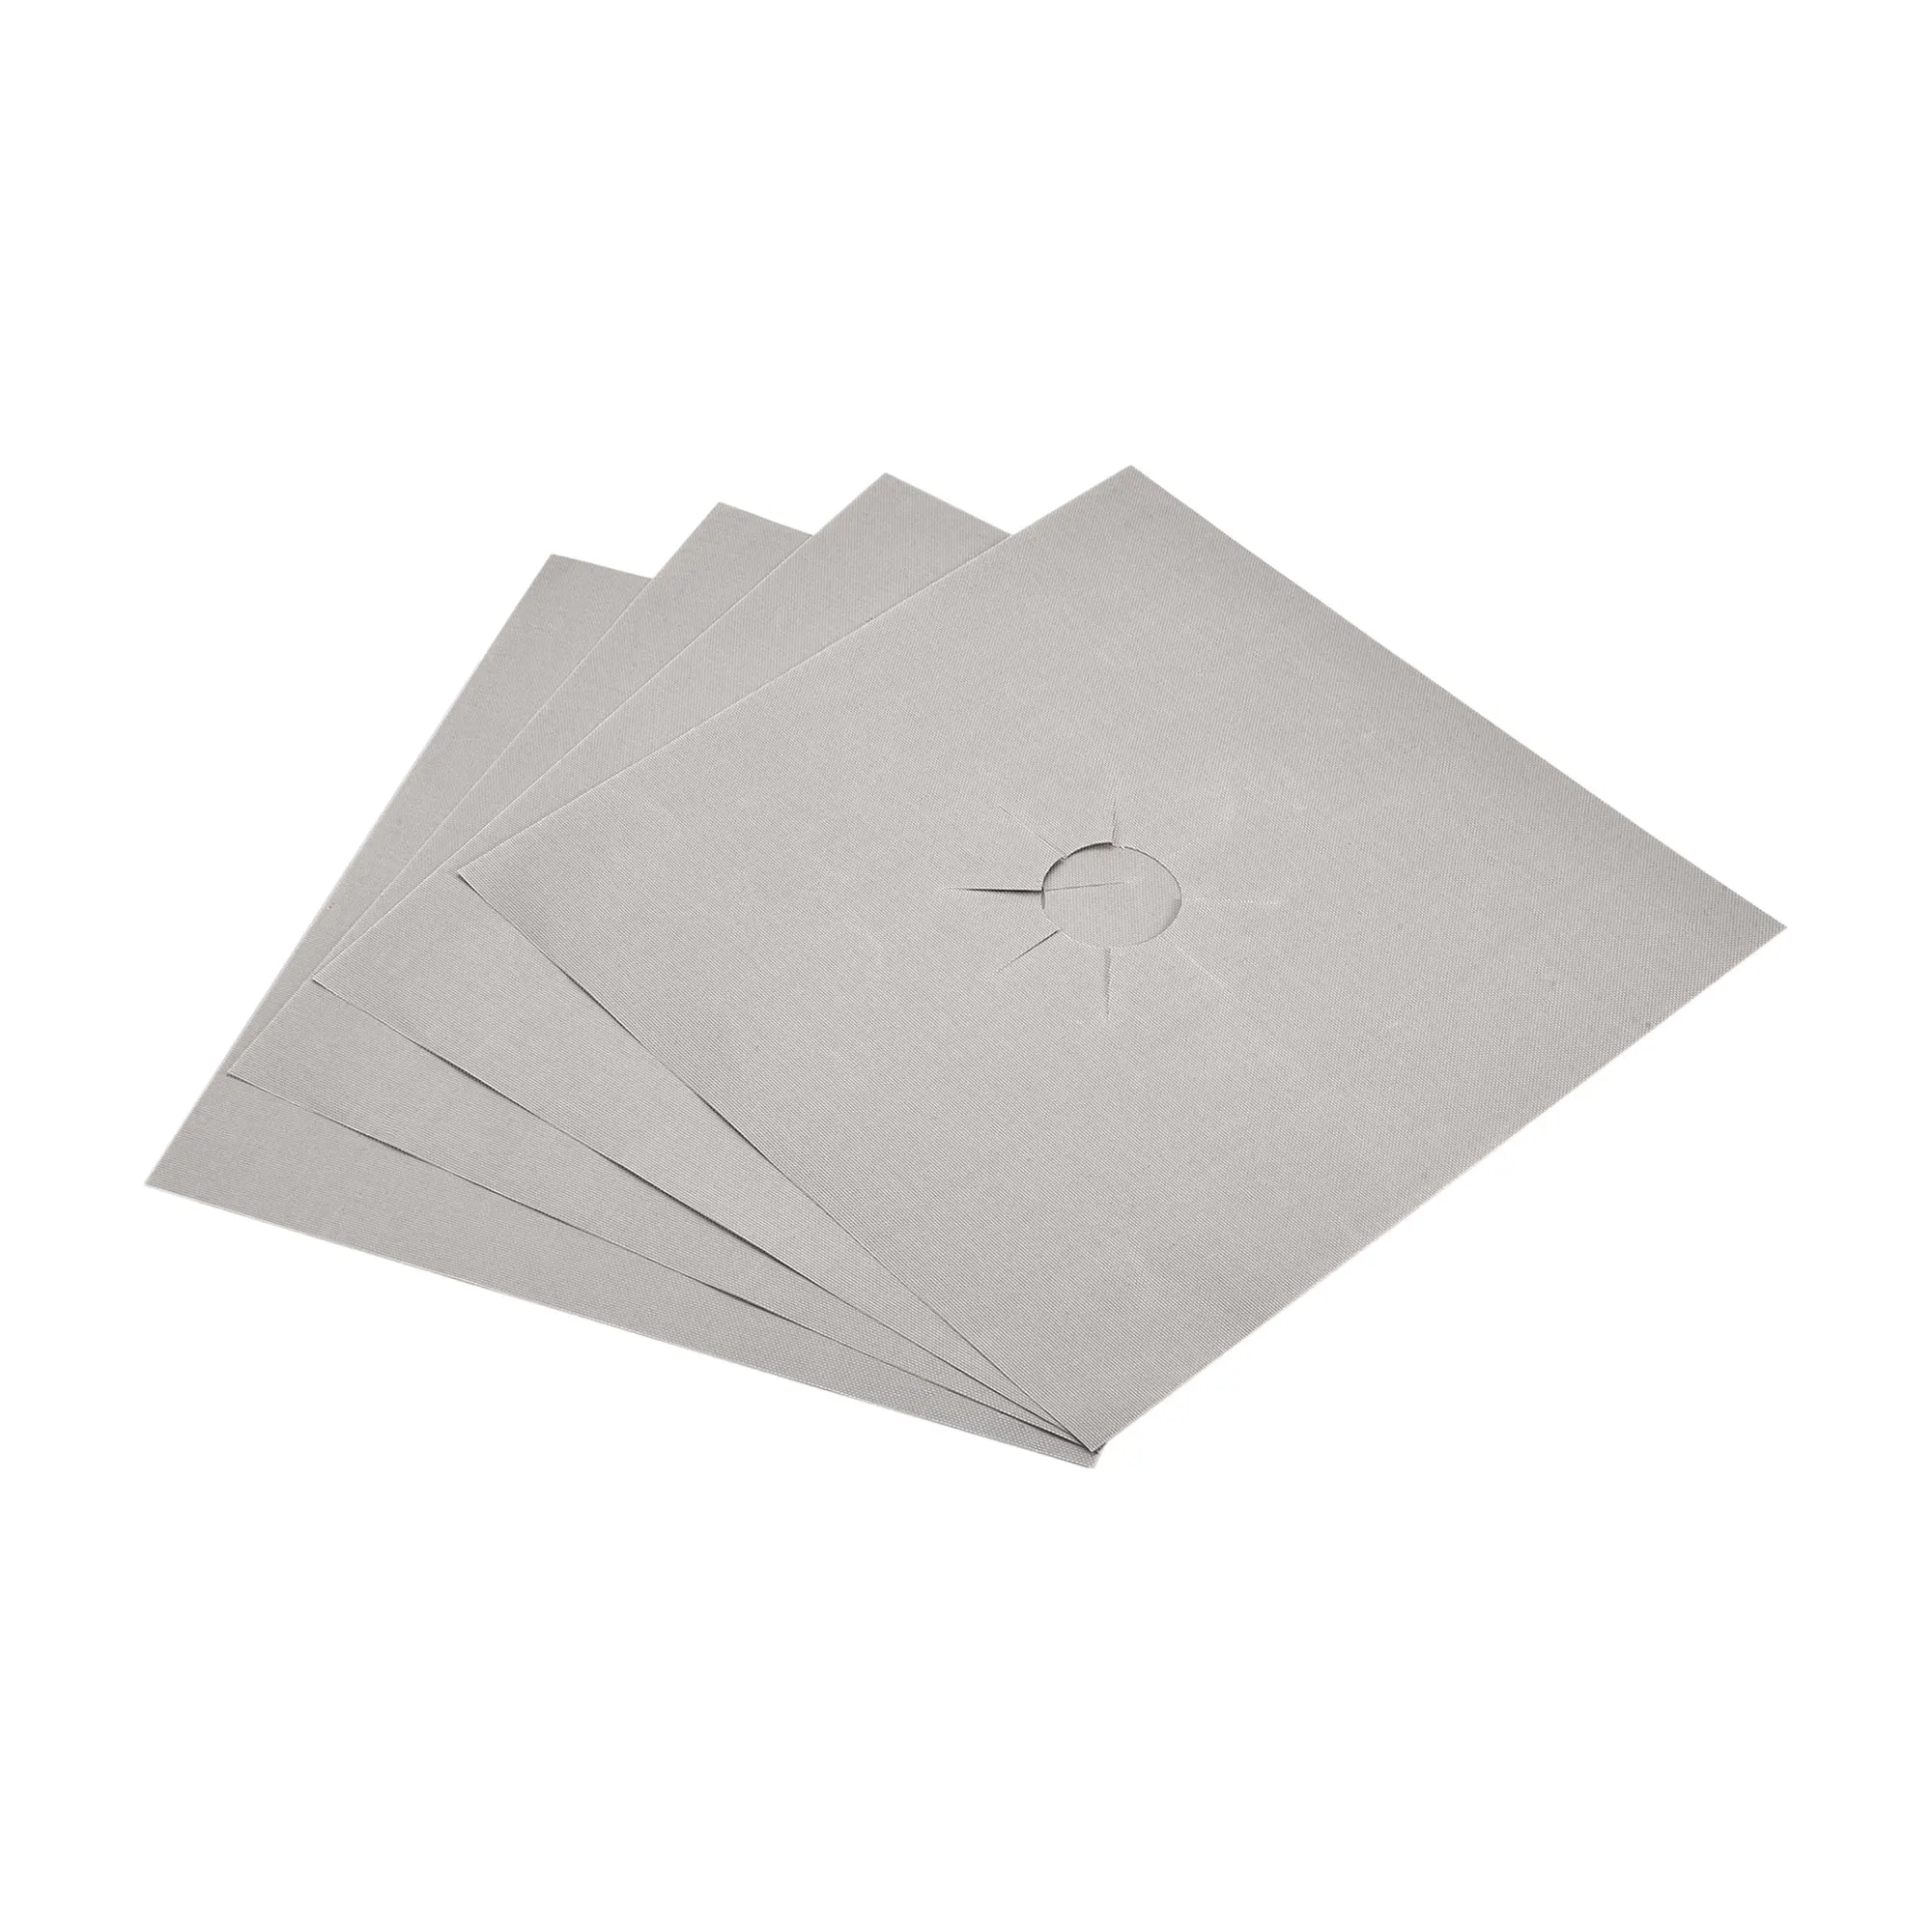 

Uxcell 270x270mm Non-Stick Stove Covers, Clean Mat Pad Range Protectors Liner Covers PTFE Sheet Silver Tone 4 Pcs